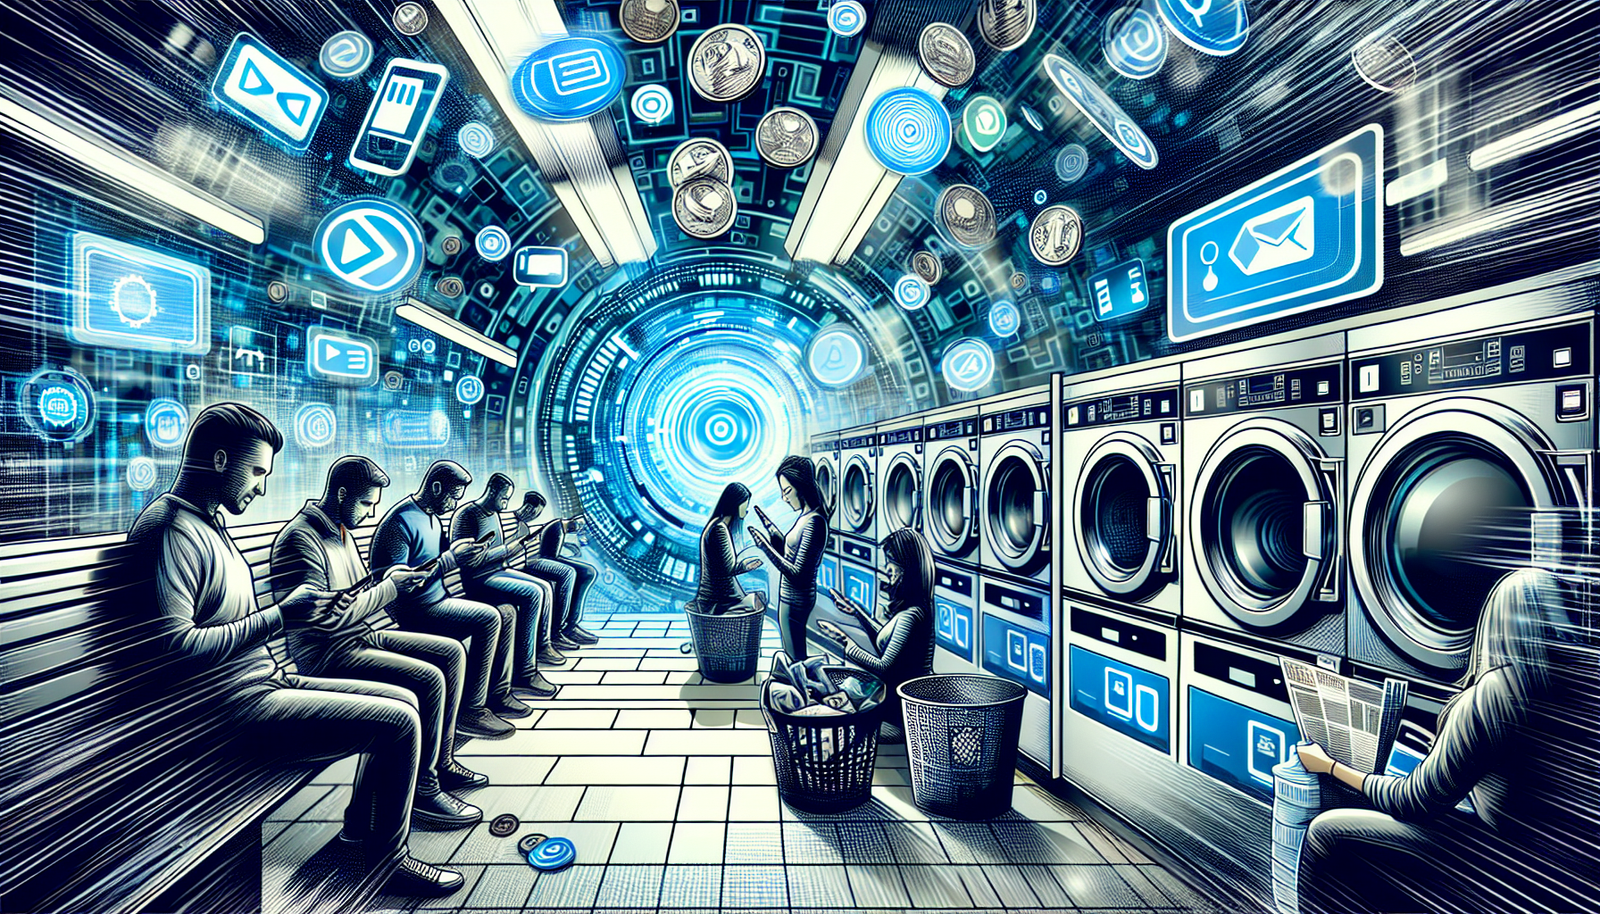 Illustration of mobile payment and app-based services in a laundromat